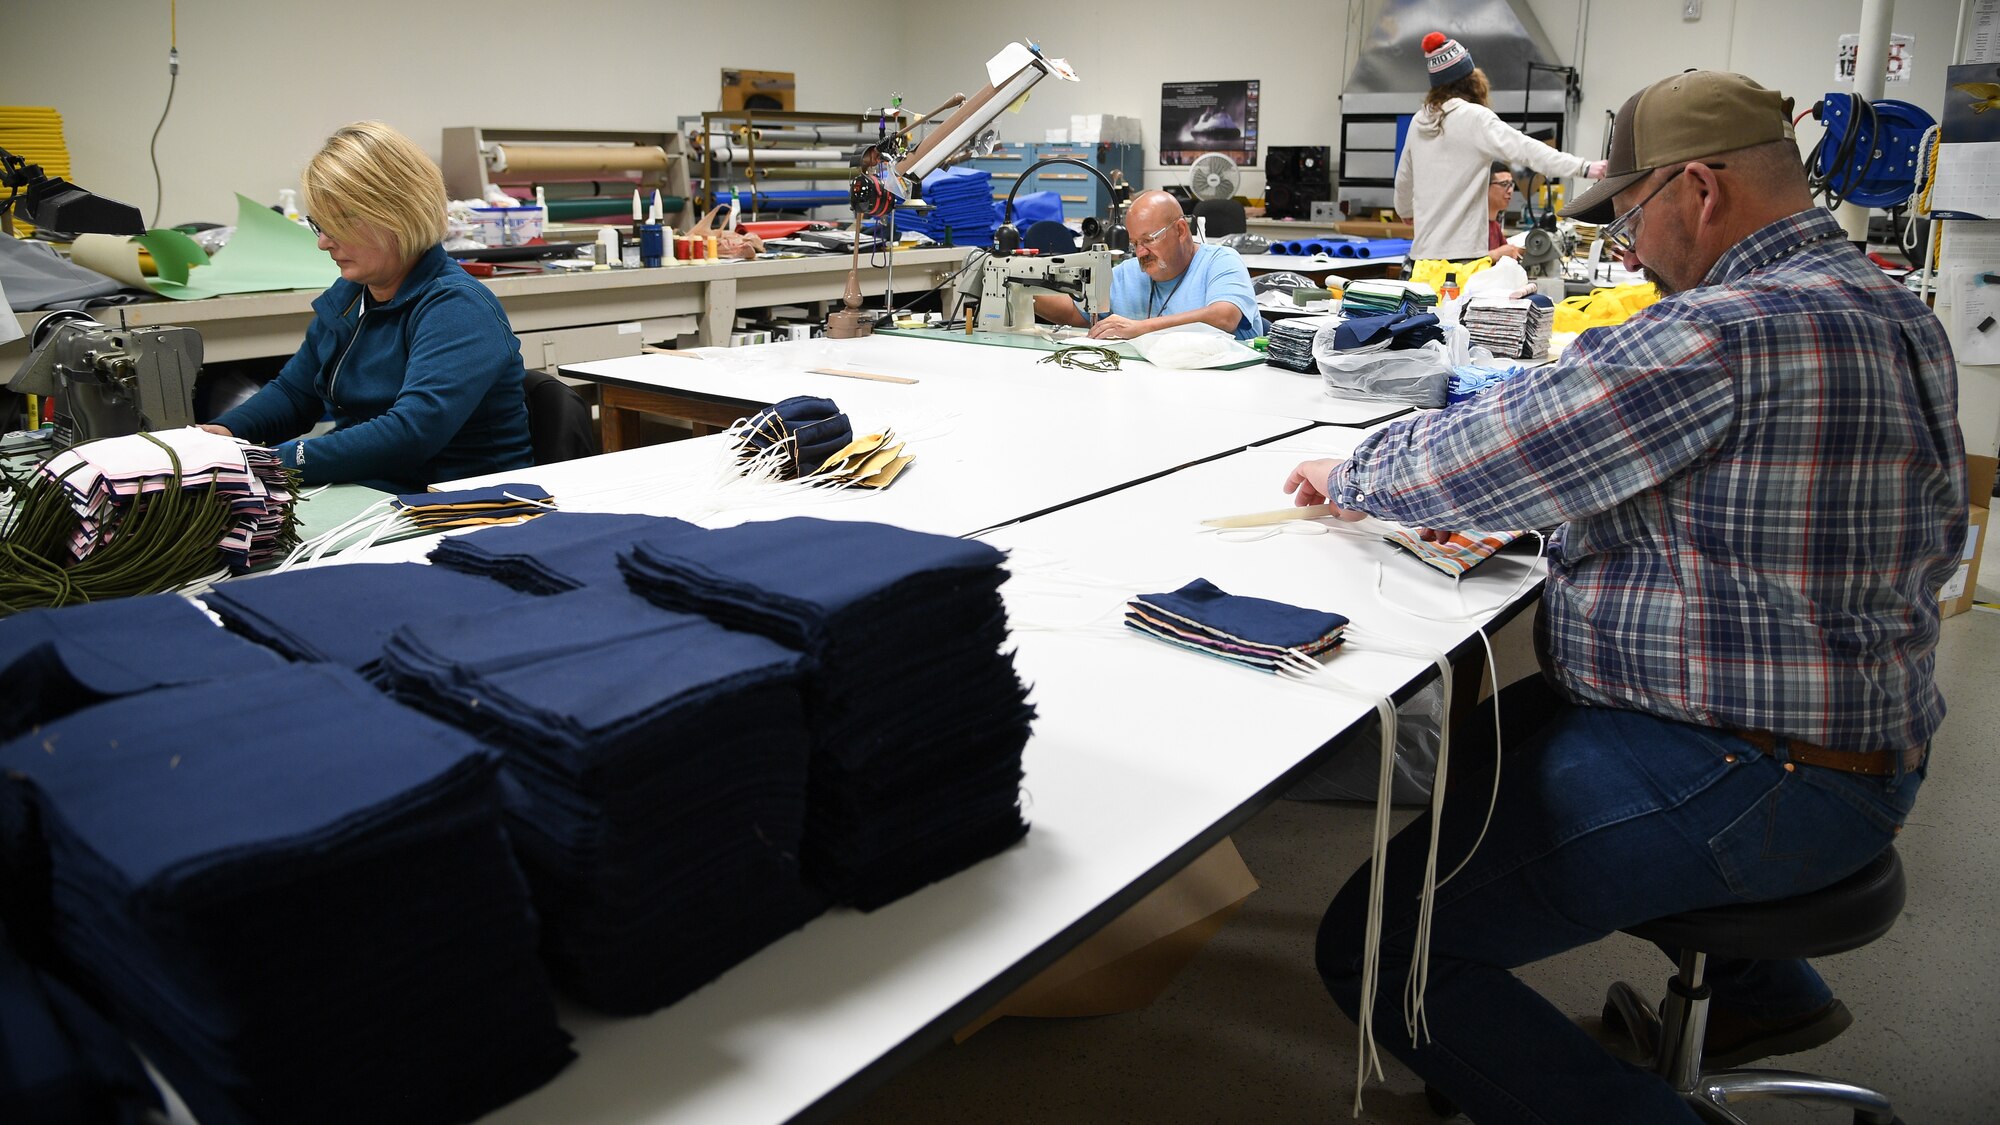 Aircrew Flight Equipment technicians with the 531st Armament Textile Shop make protective cloth masks at Hill Air Force Base, Utah, April 15, 2020. The shop is using their skill set and equipment to produce cloth face coverings for members of Team Hill. (U.S. Air Force photo by R. Nial Bradshaw)